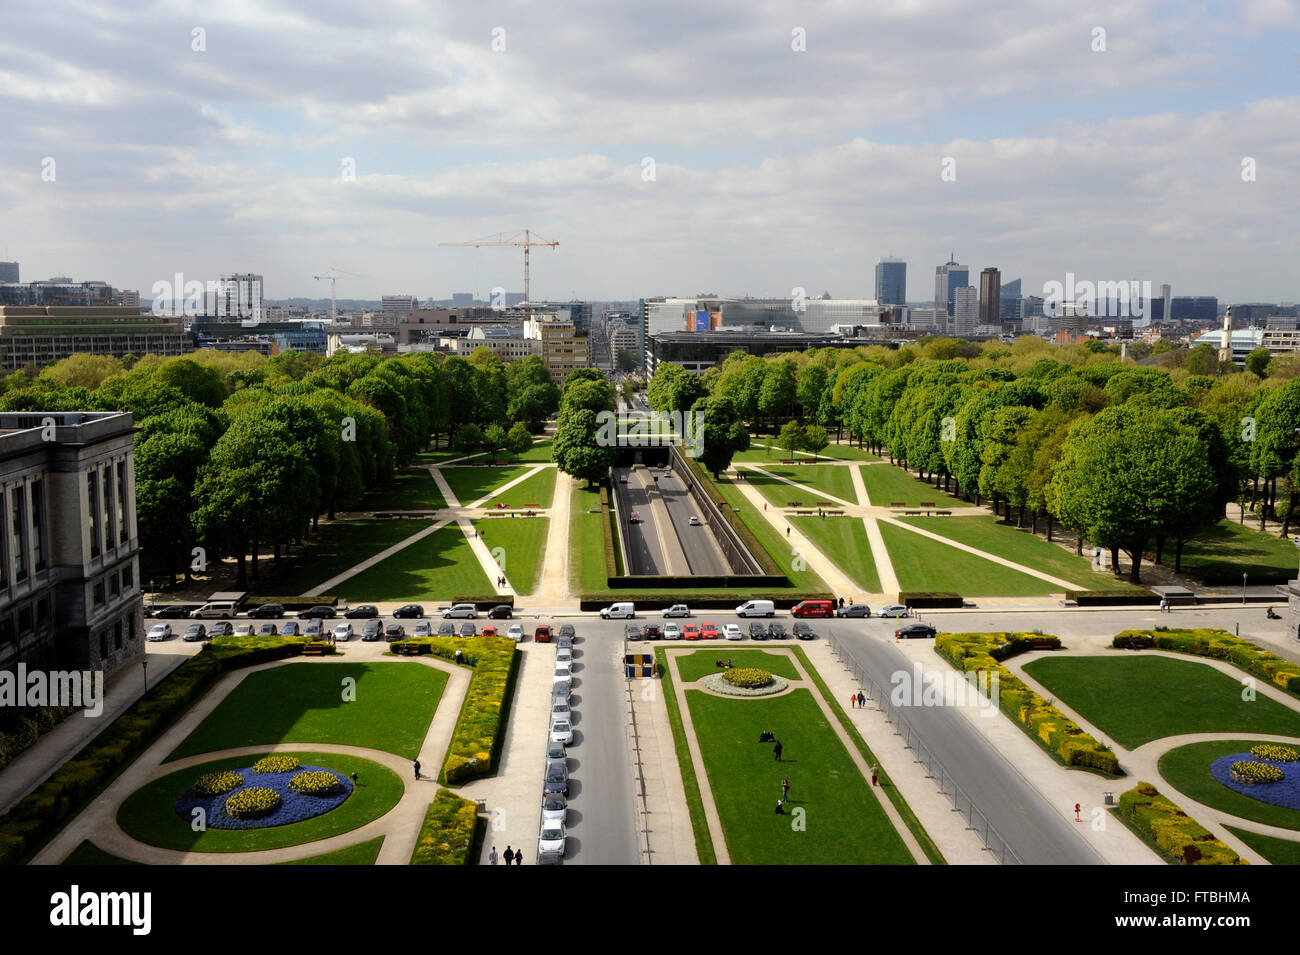 Park of the Fiftieth Anniversary and European Quarter,Brussels,Belgium Stock Photo